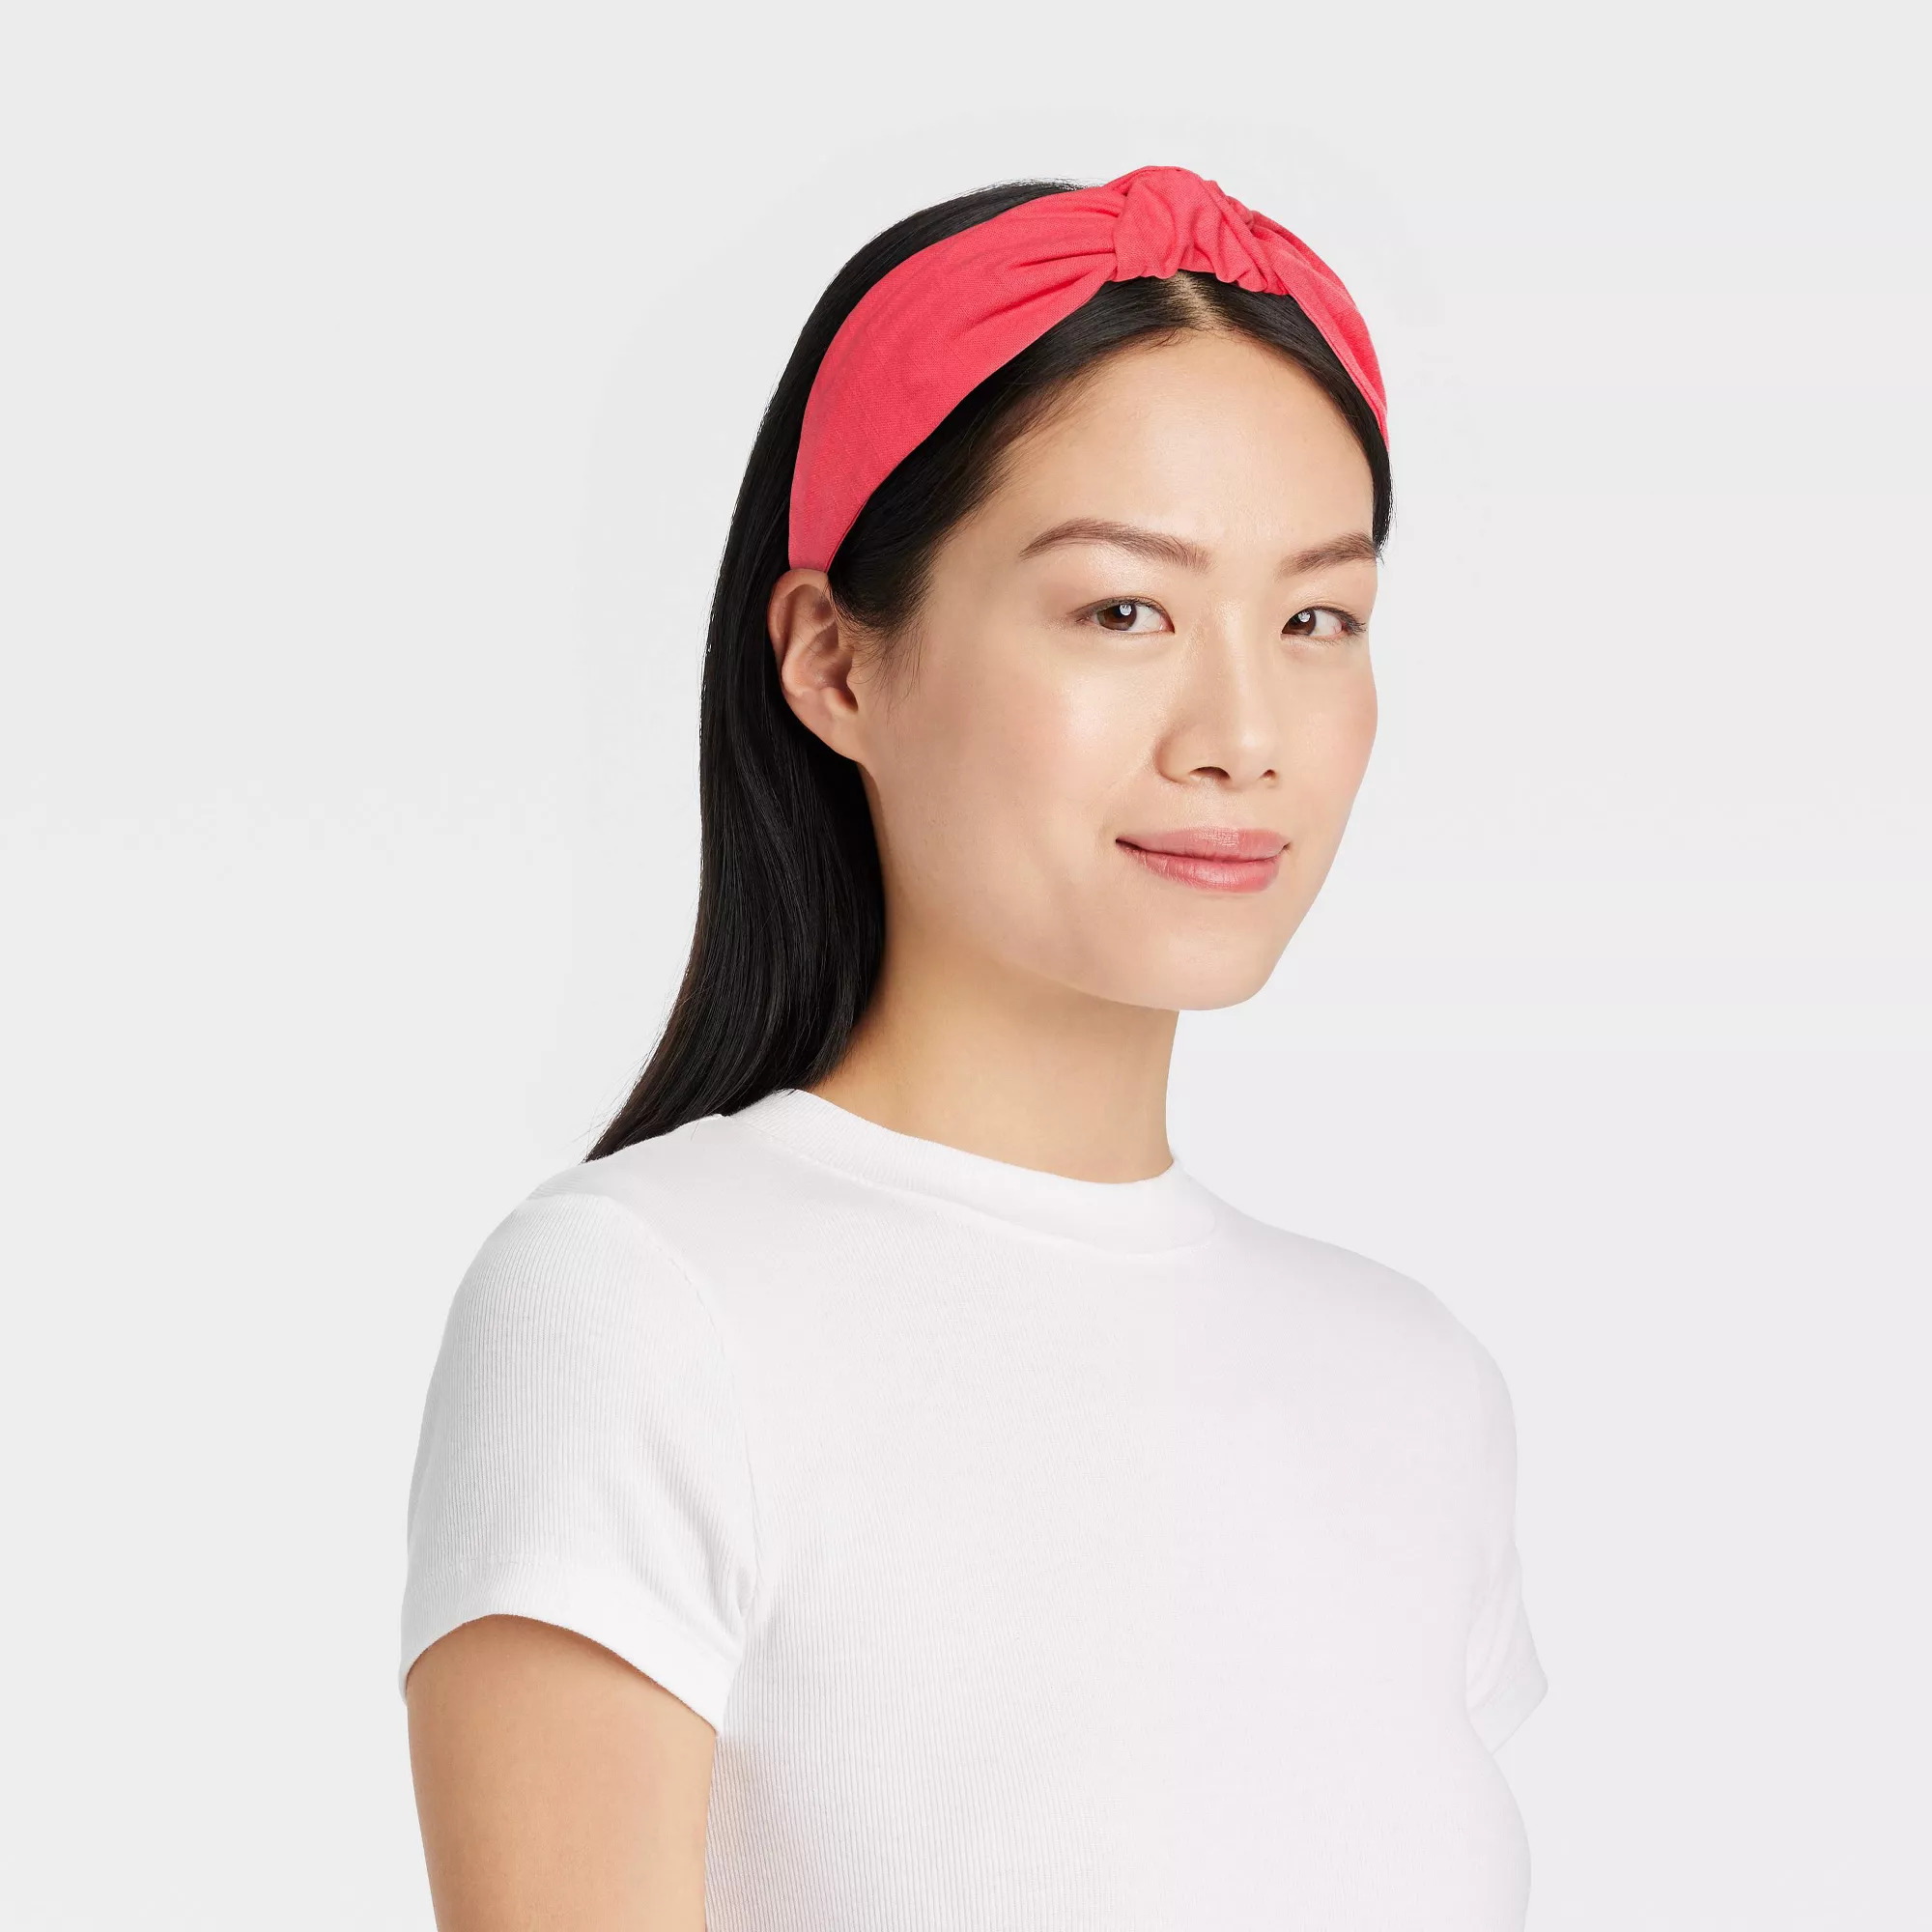 Model wearing a bright pink headband and a white T-shirt